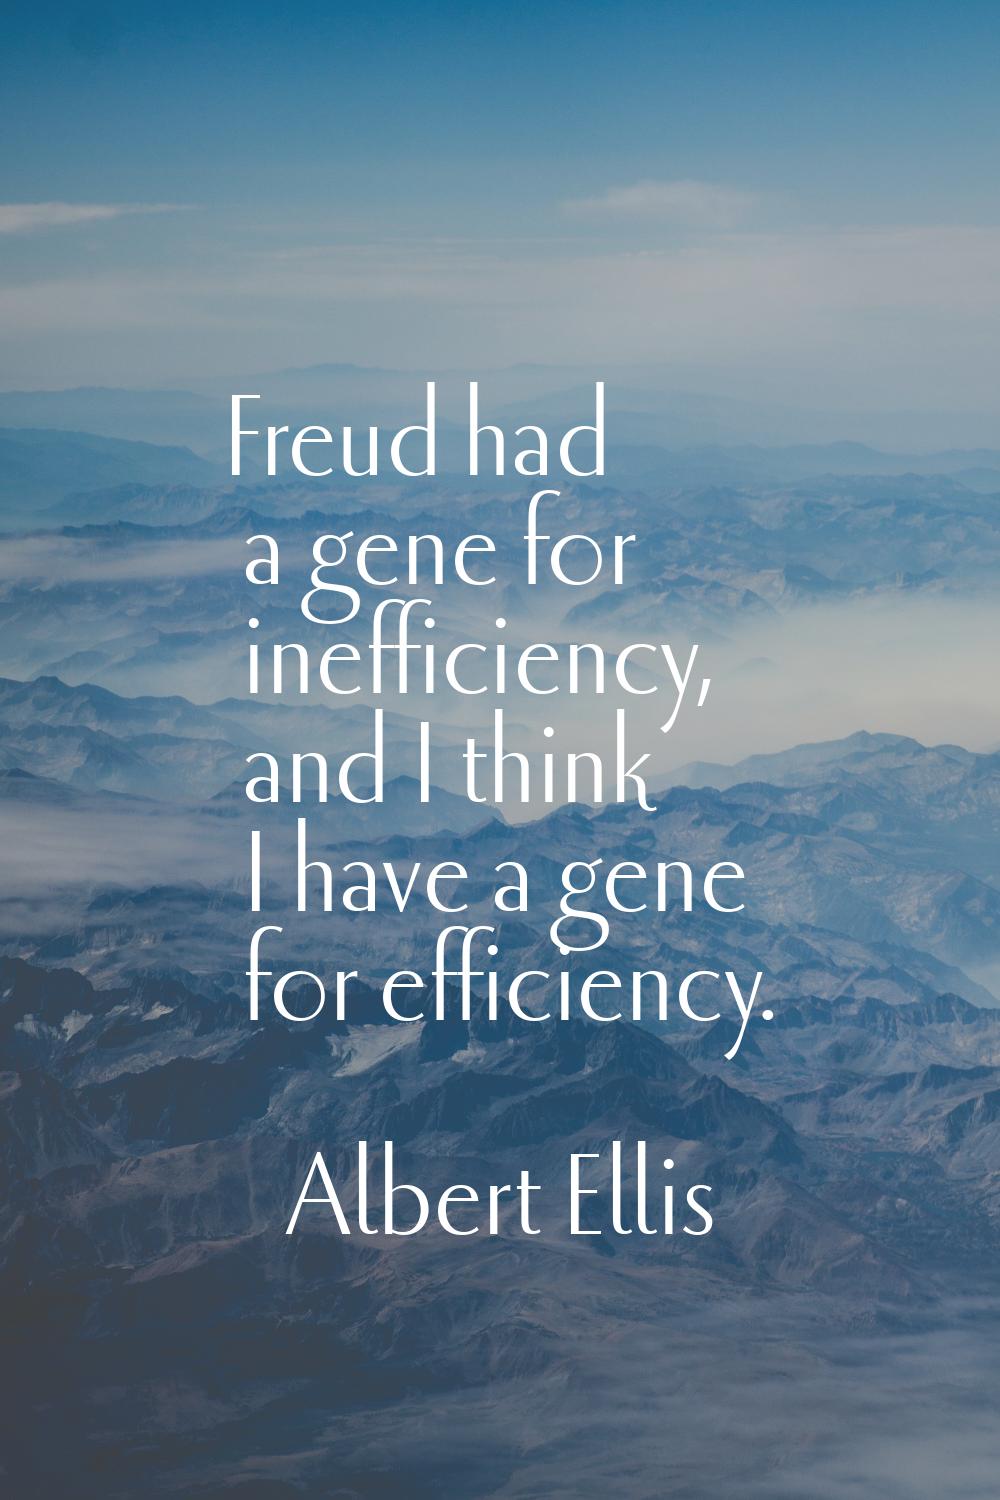 Freud had a gene for inefficiency, and I think I have a gene for efficiency.